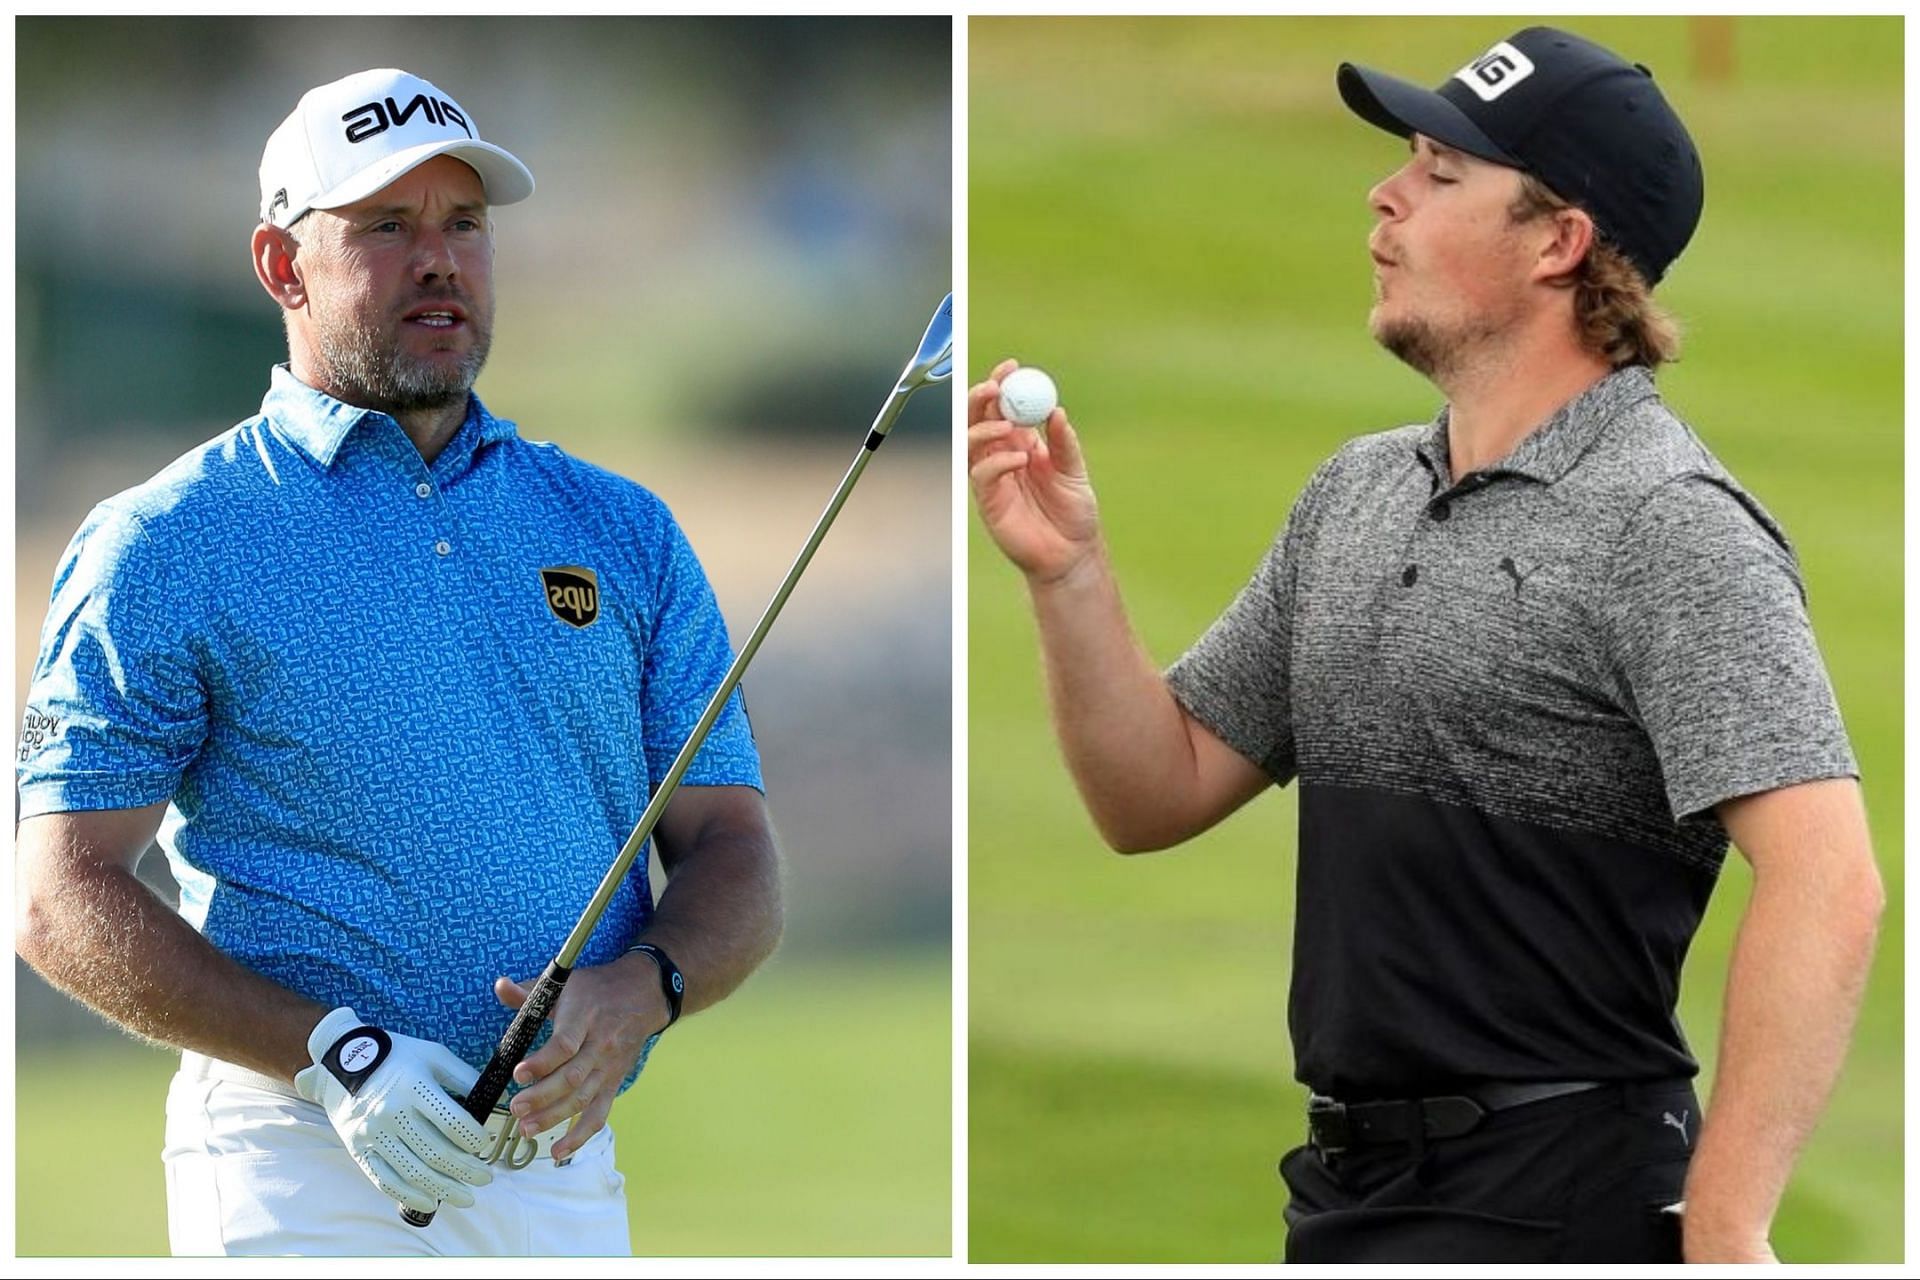 Lee Westwood and Eddie Pepperell got into Twitter spat